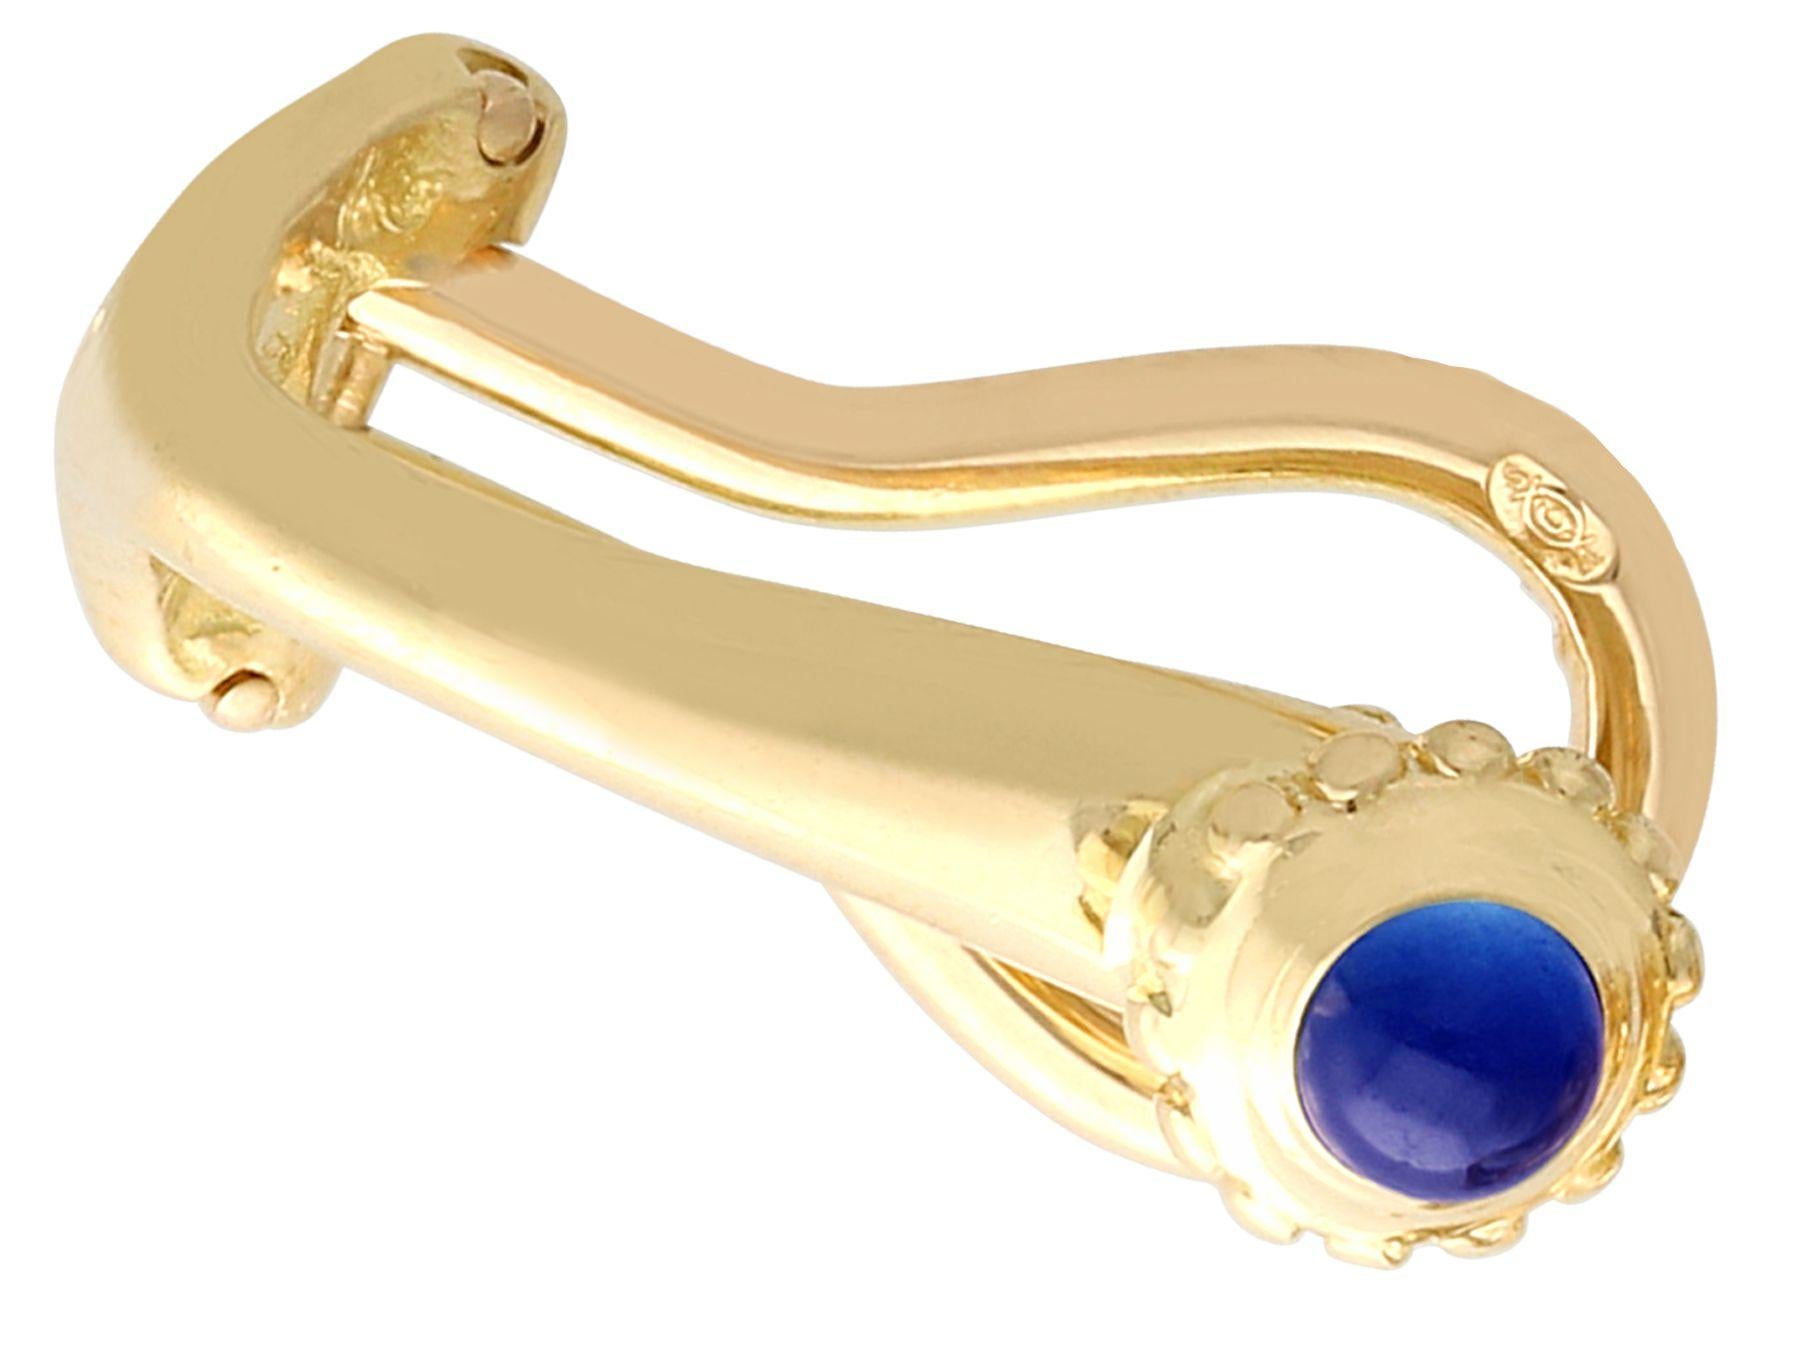 A fine and impressive pair of vintage 0.16 carat sapphire, 18 karat yellow gold earrings, made by Cartier; part of our diverse sapphire jewelry collections.

These fine and impressive vintage cabochon cut sapphire earrings have been crafted in 18k